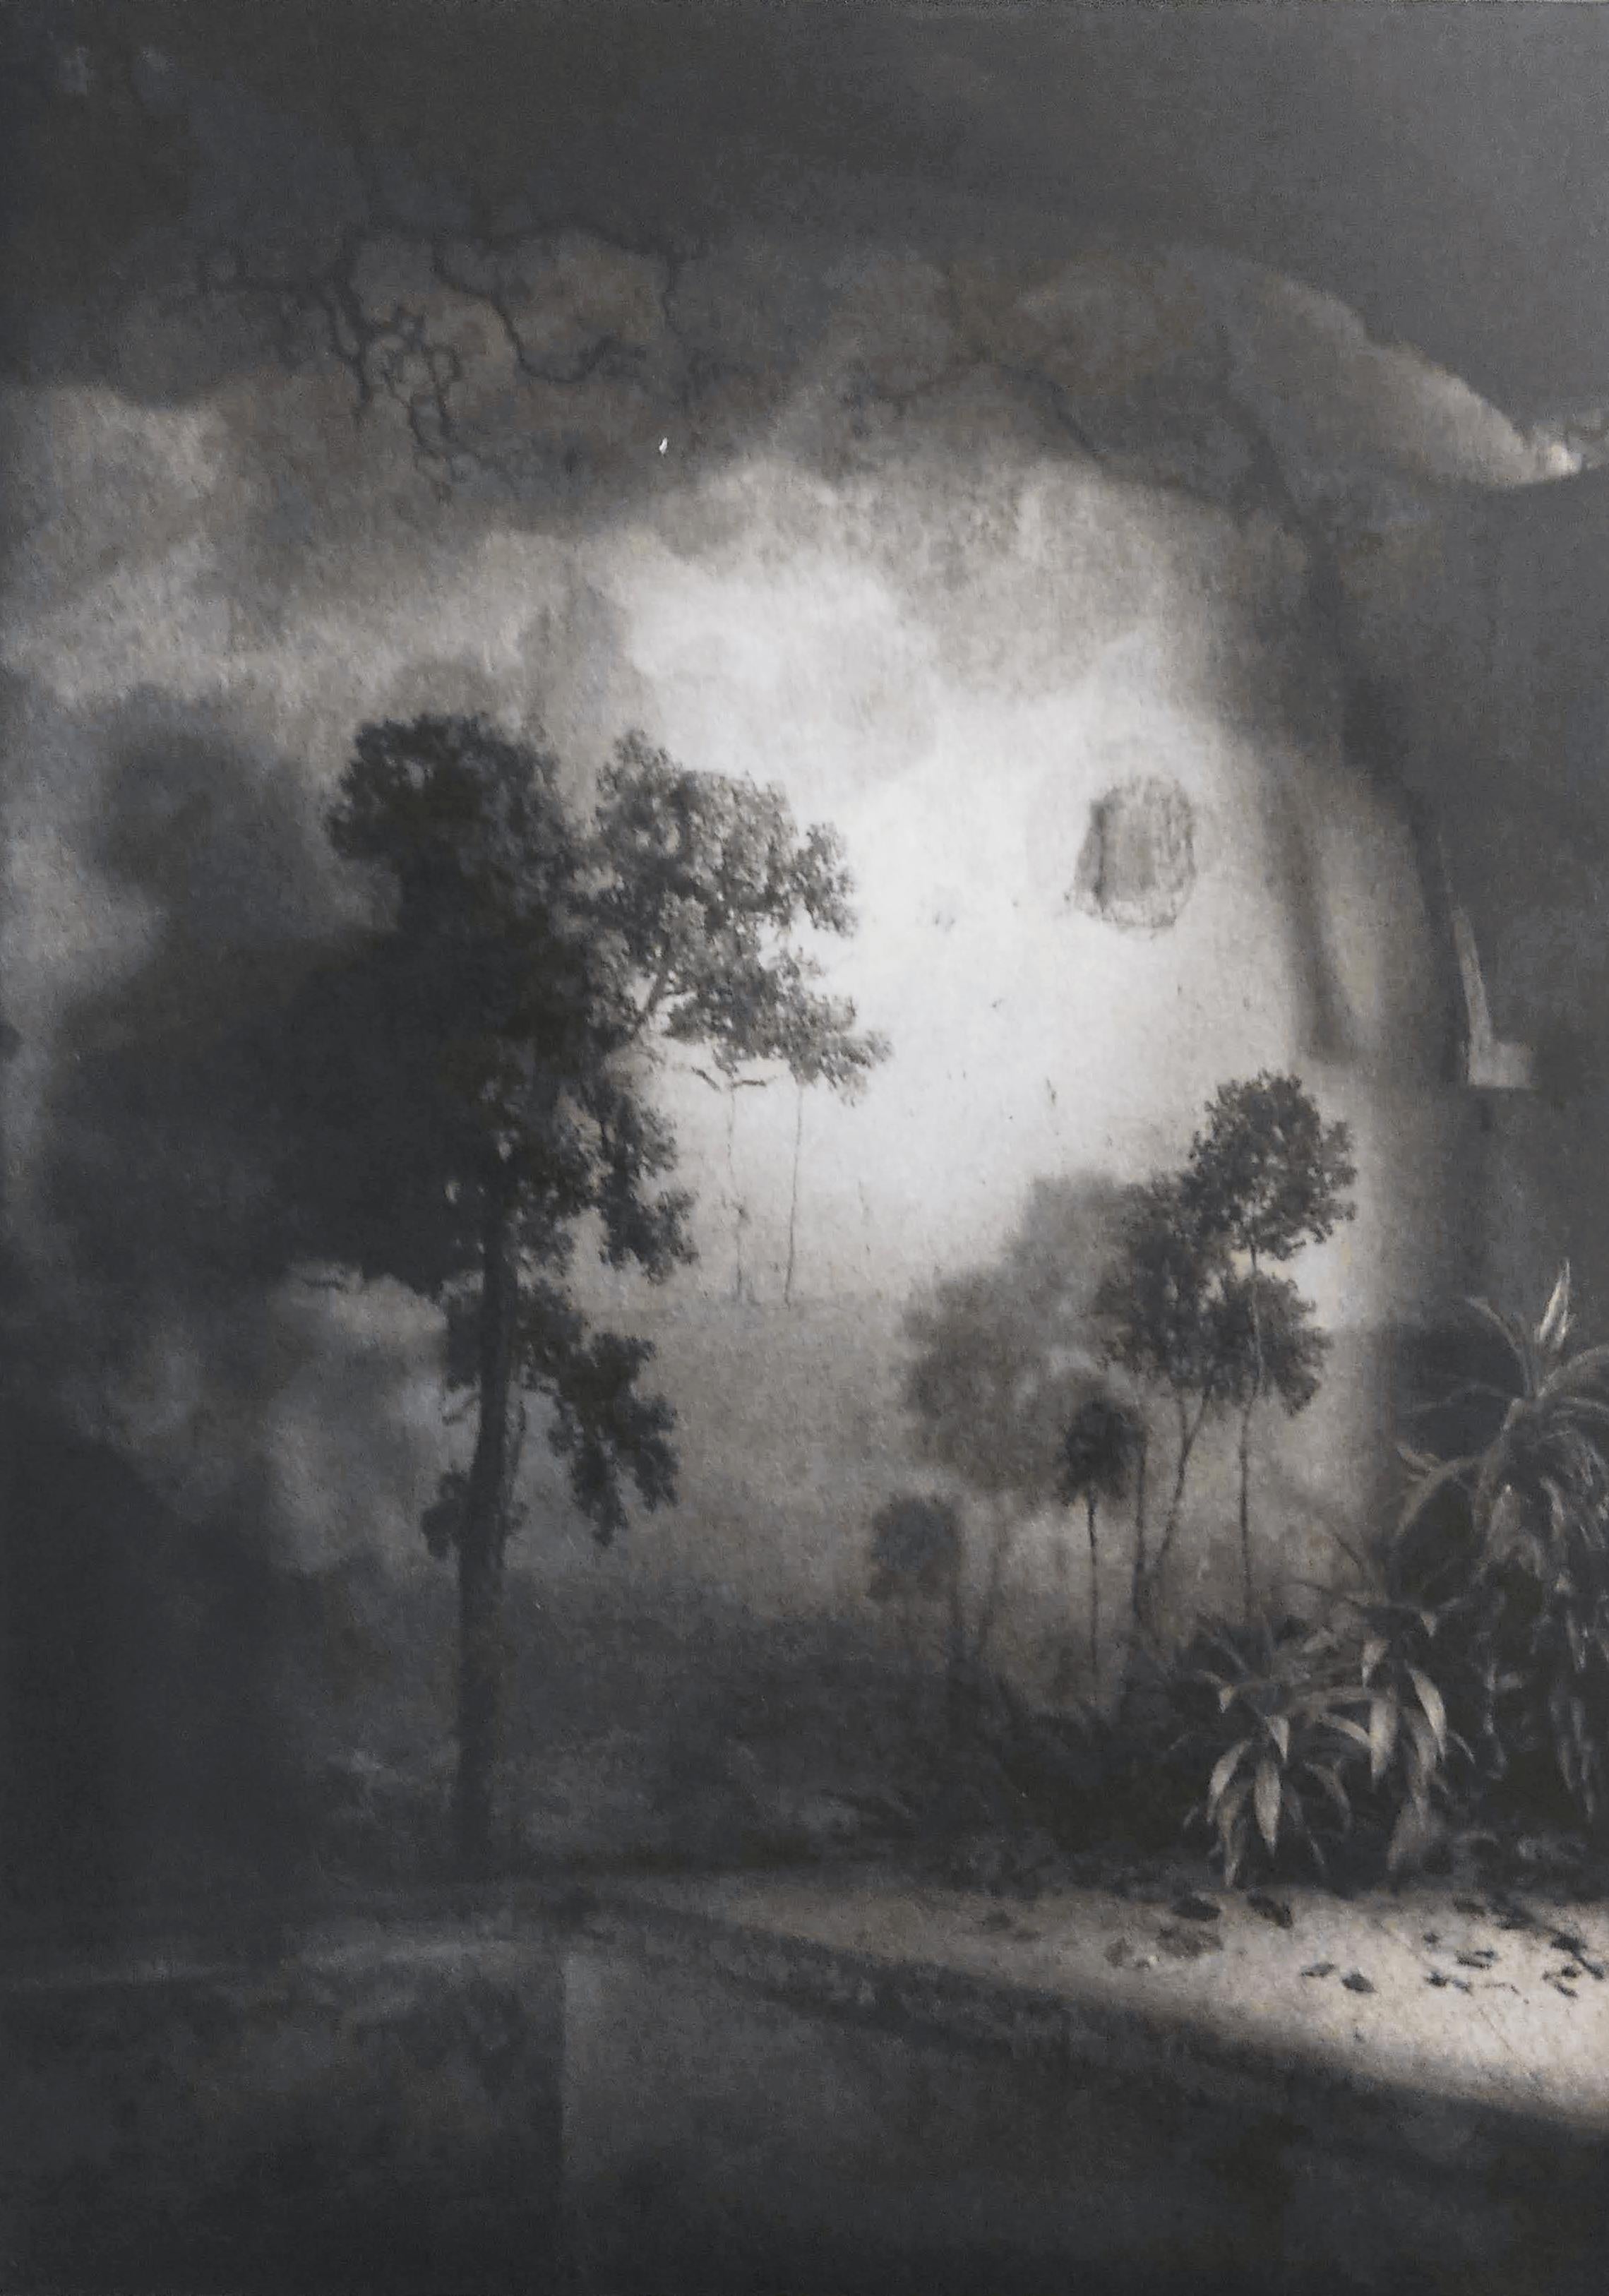 Suzanne Moxhay Black and White Photograph - Room with Trees and Vegetation, Interior Photography, Photomontage, Etching